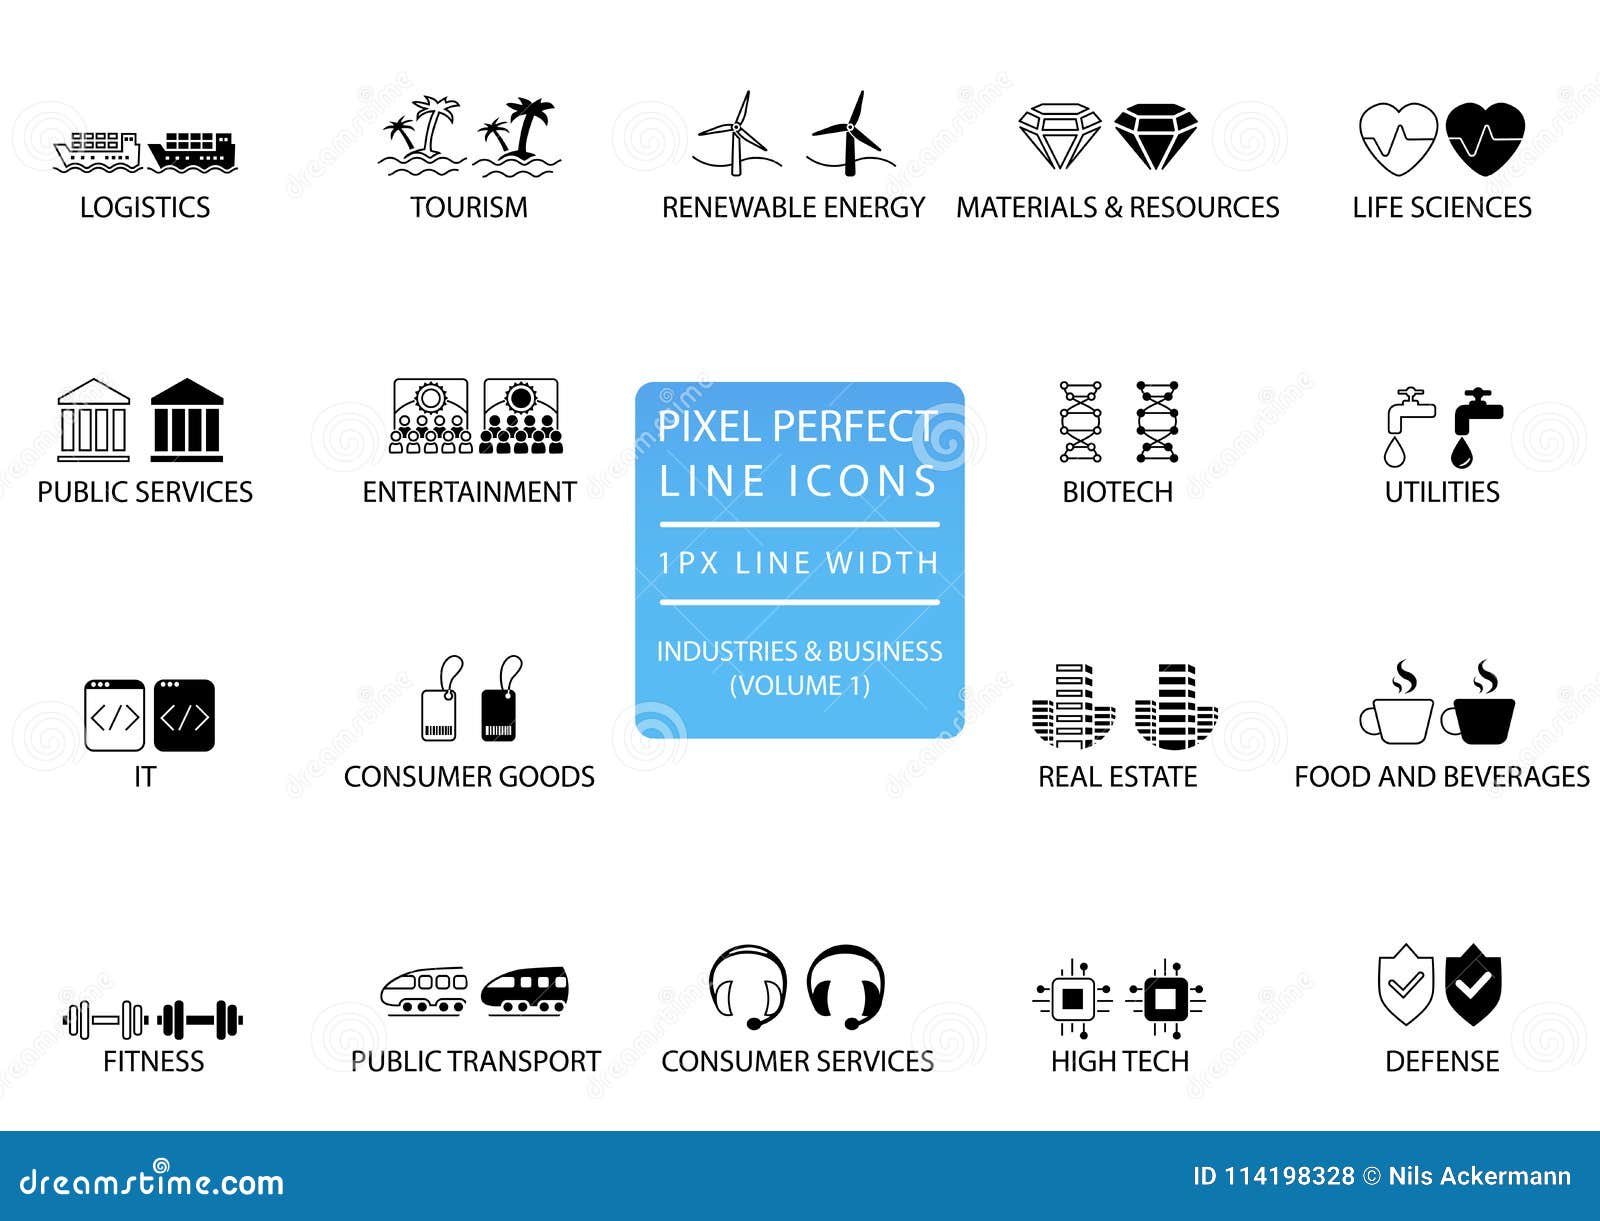 pixel perfect thin line icons and s of various industries / business sectors like public services, consumer goods, defence,